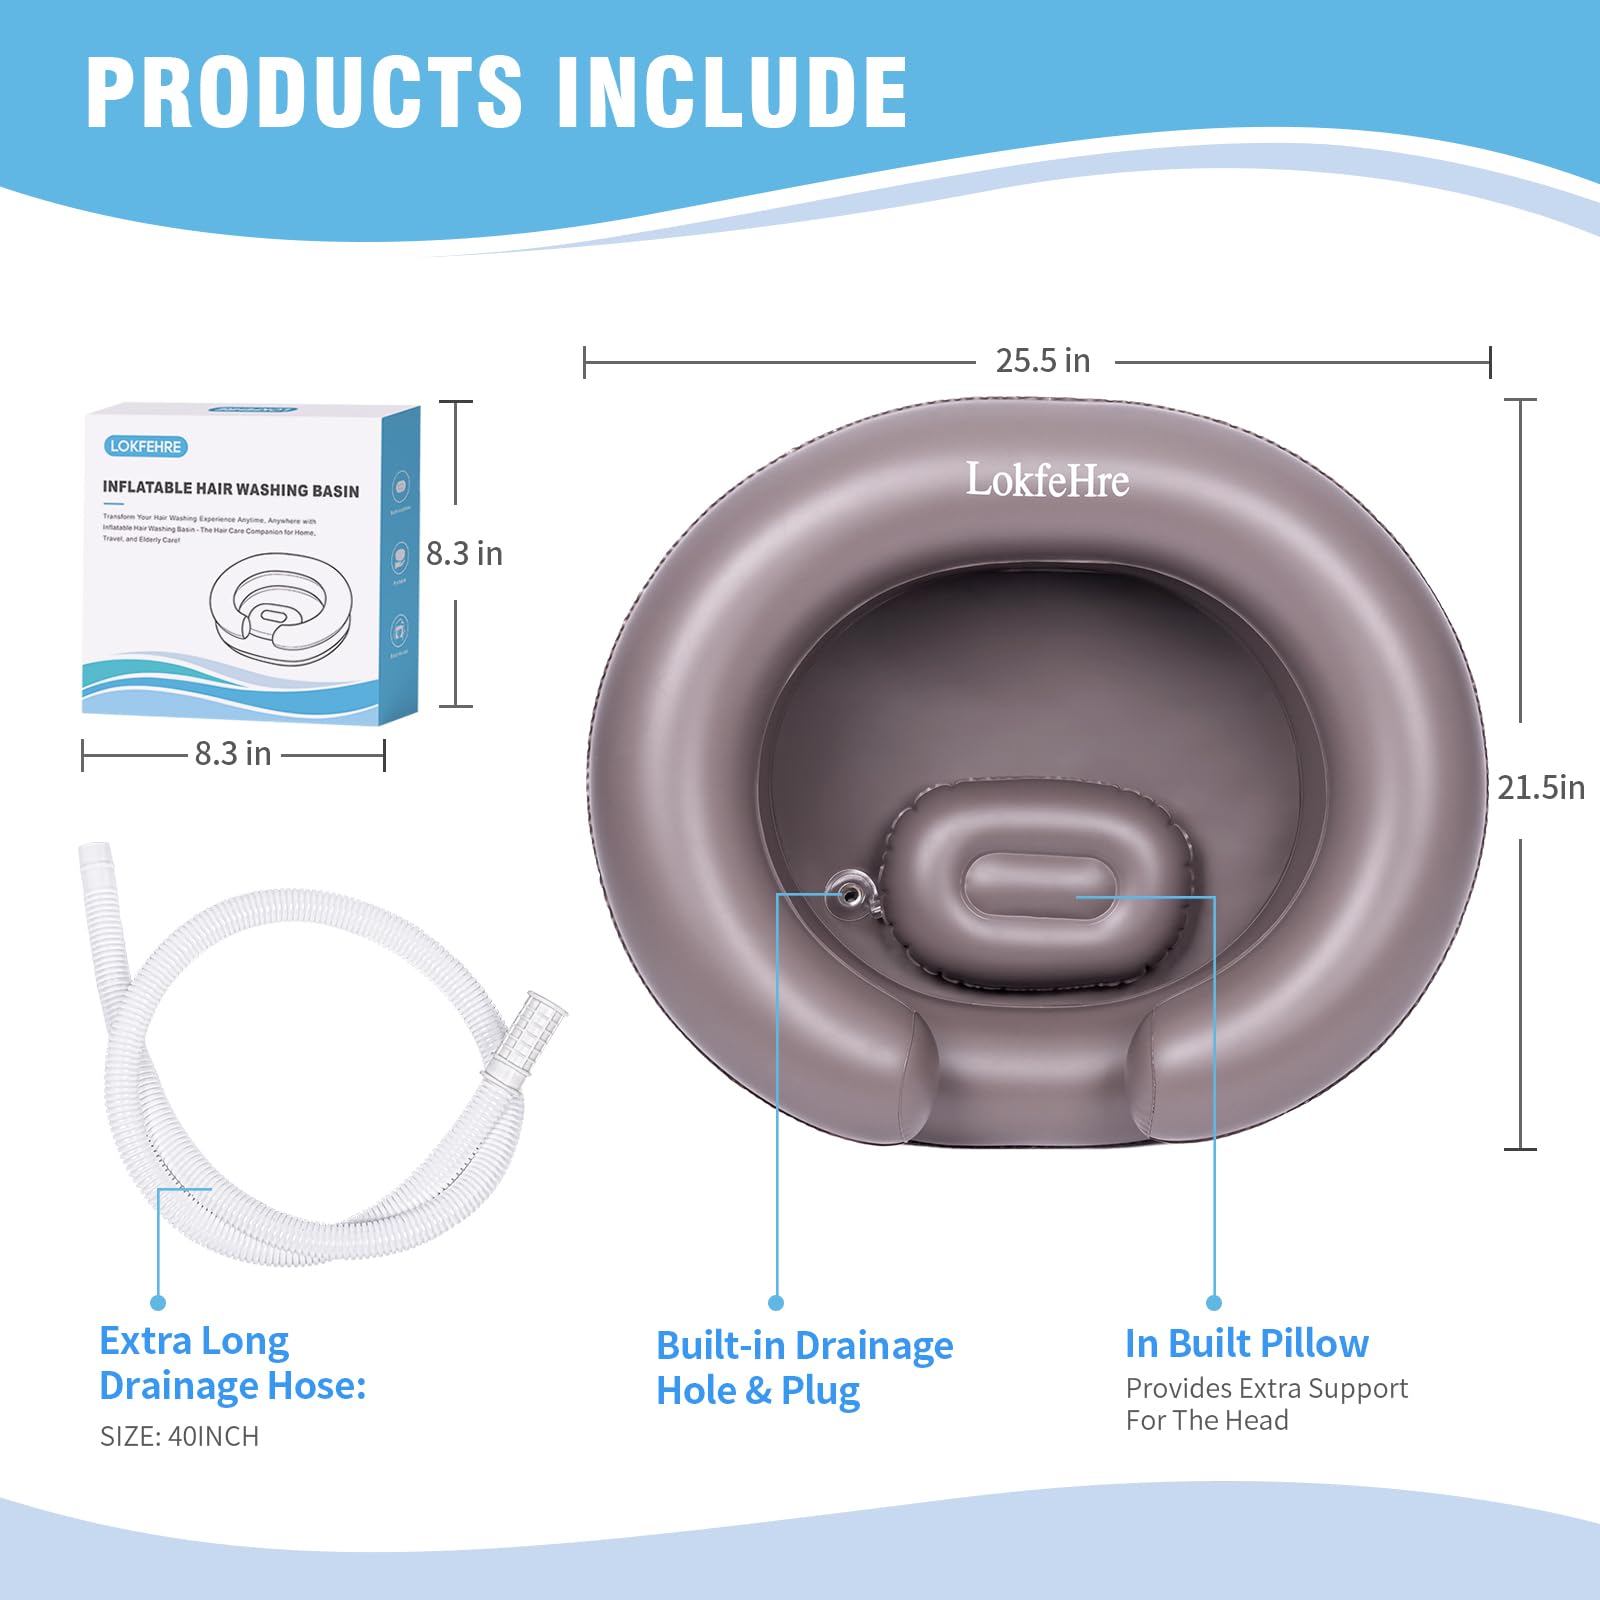 LOKFEHRE Portable Inflatable Hair Washing Basin for Bedridden - Wash Hair in Bed with Inflatable Shampoo Bowl.Hair Washing Basin for Elderly,Disabled,Injured,Ideal Inflatable Sink for Locs Detox.